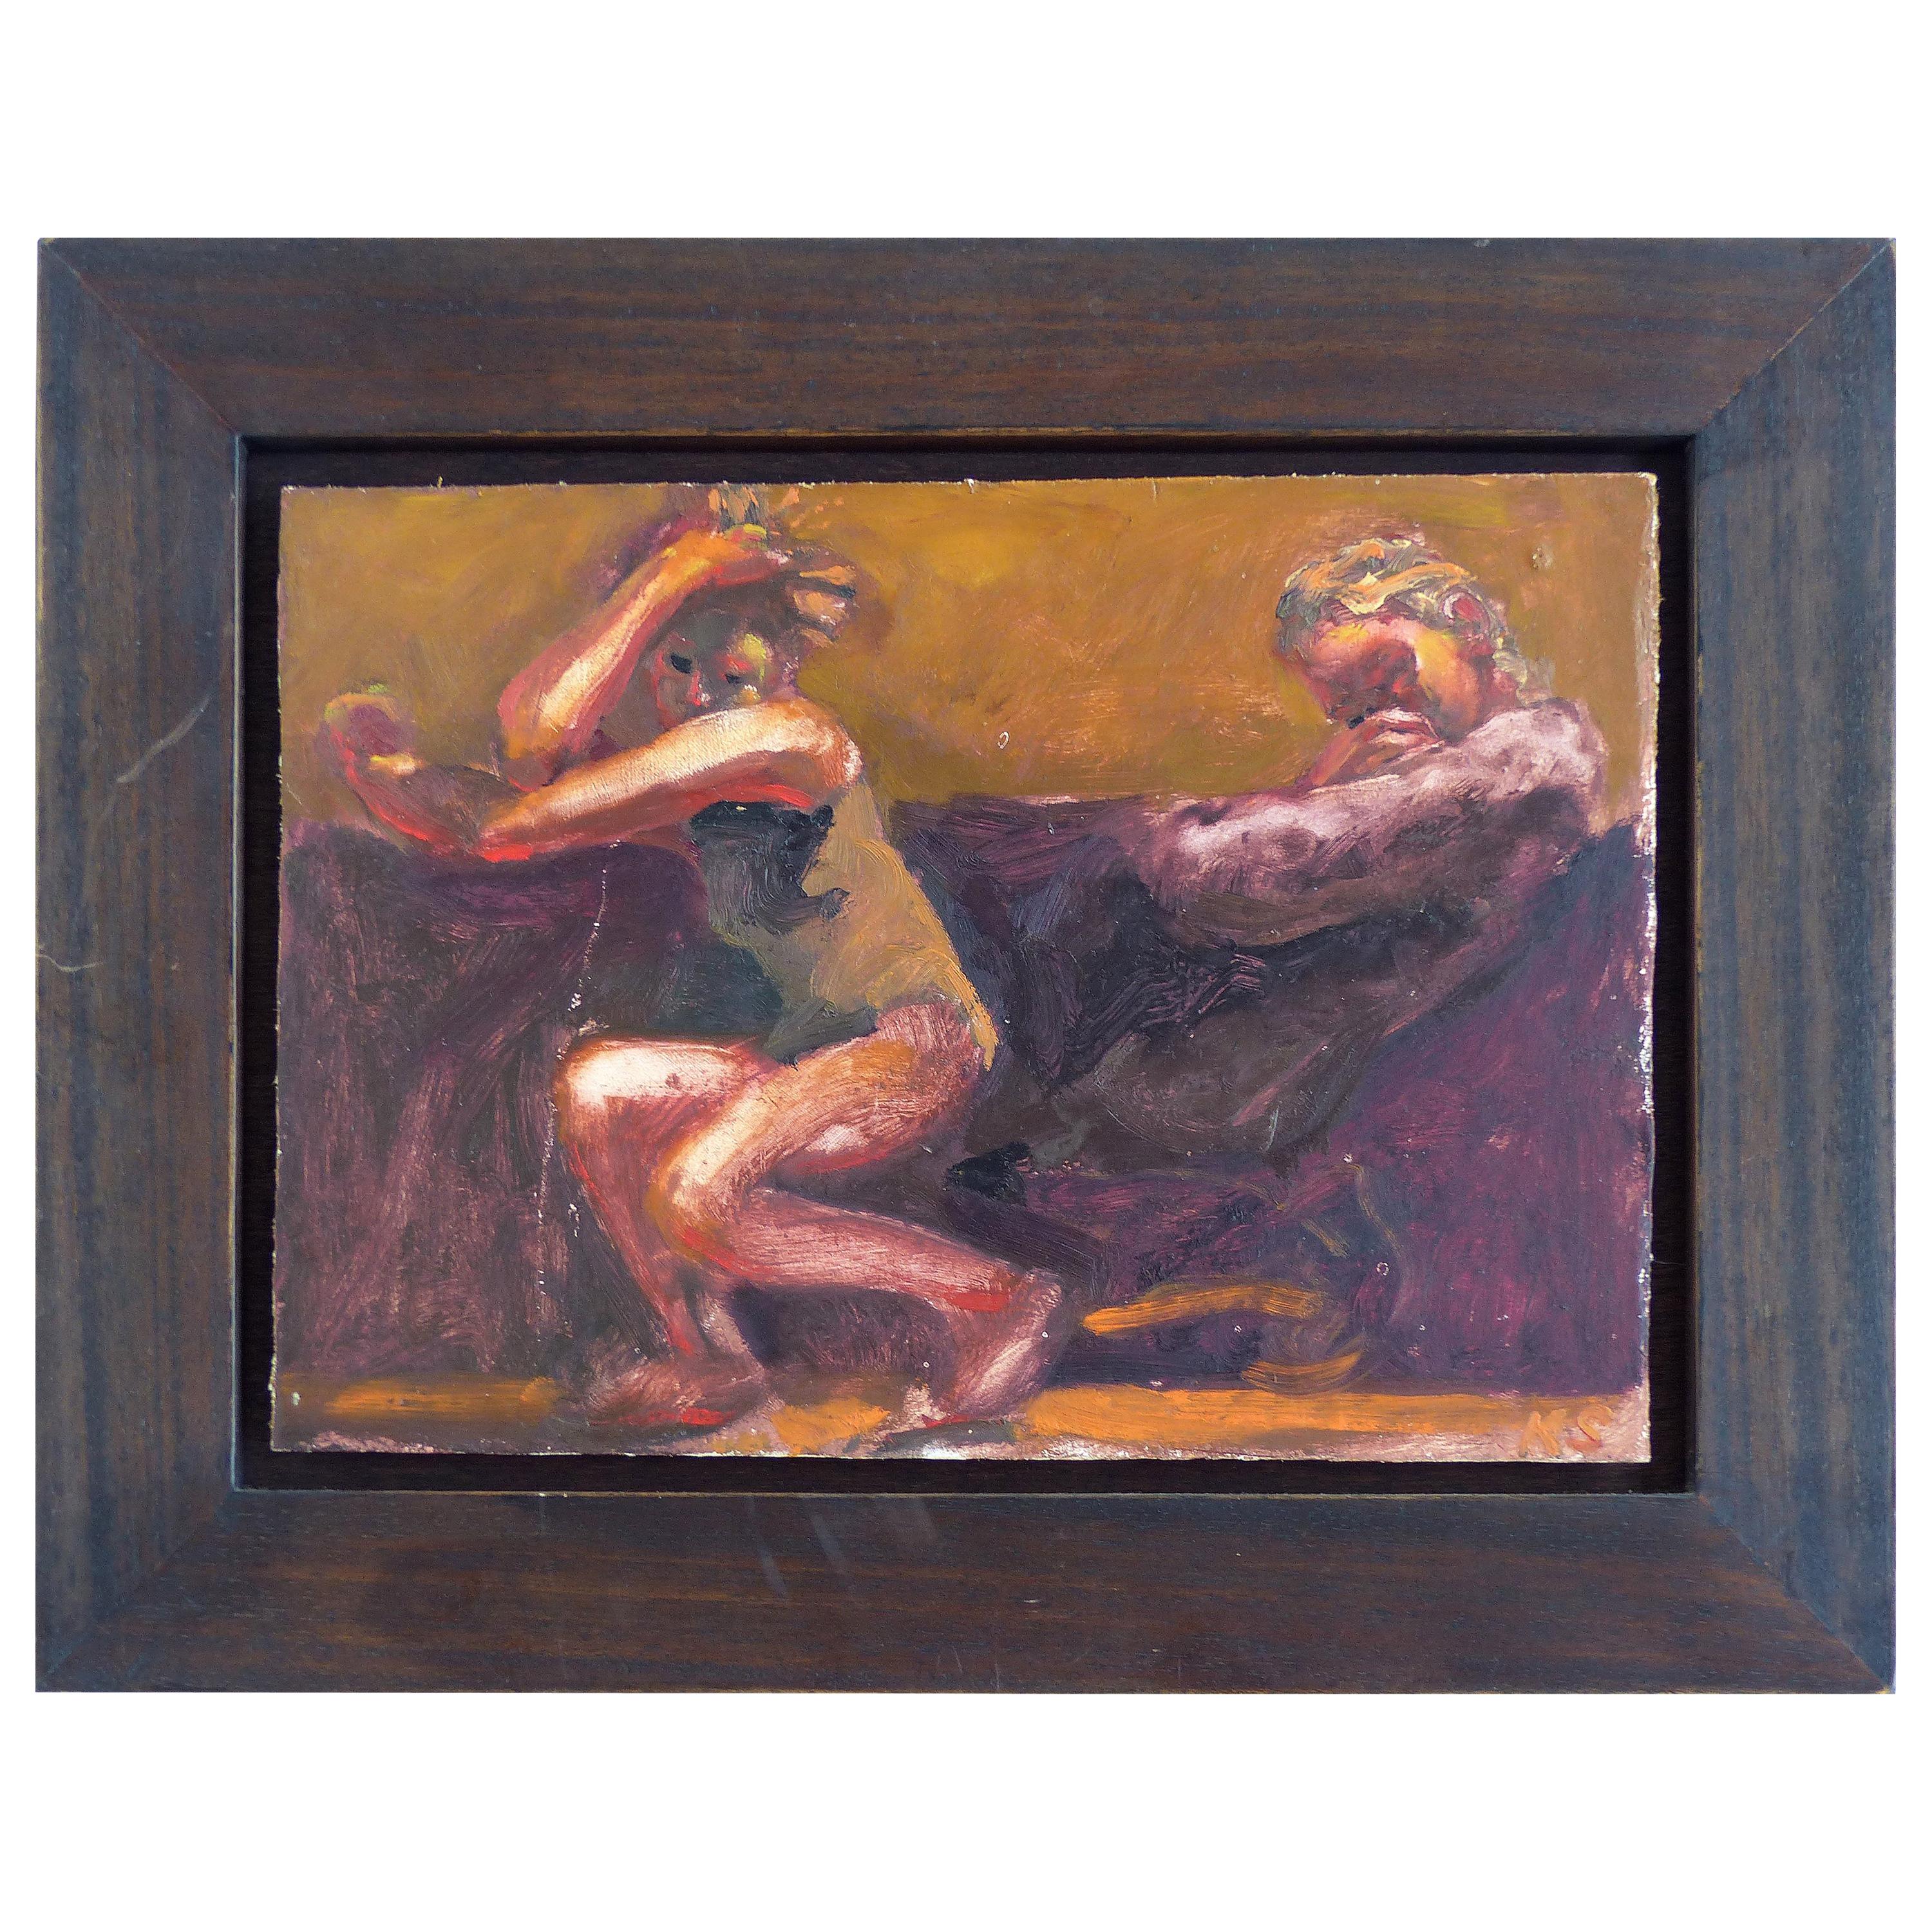 Kevin Sinnott, Oil Painting on Wood Panel Titled "Study for a Disco Dancer"